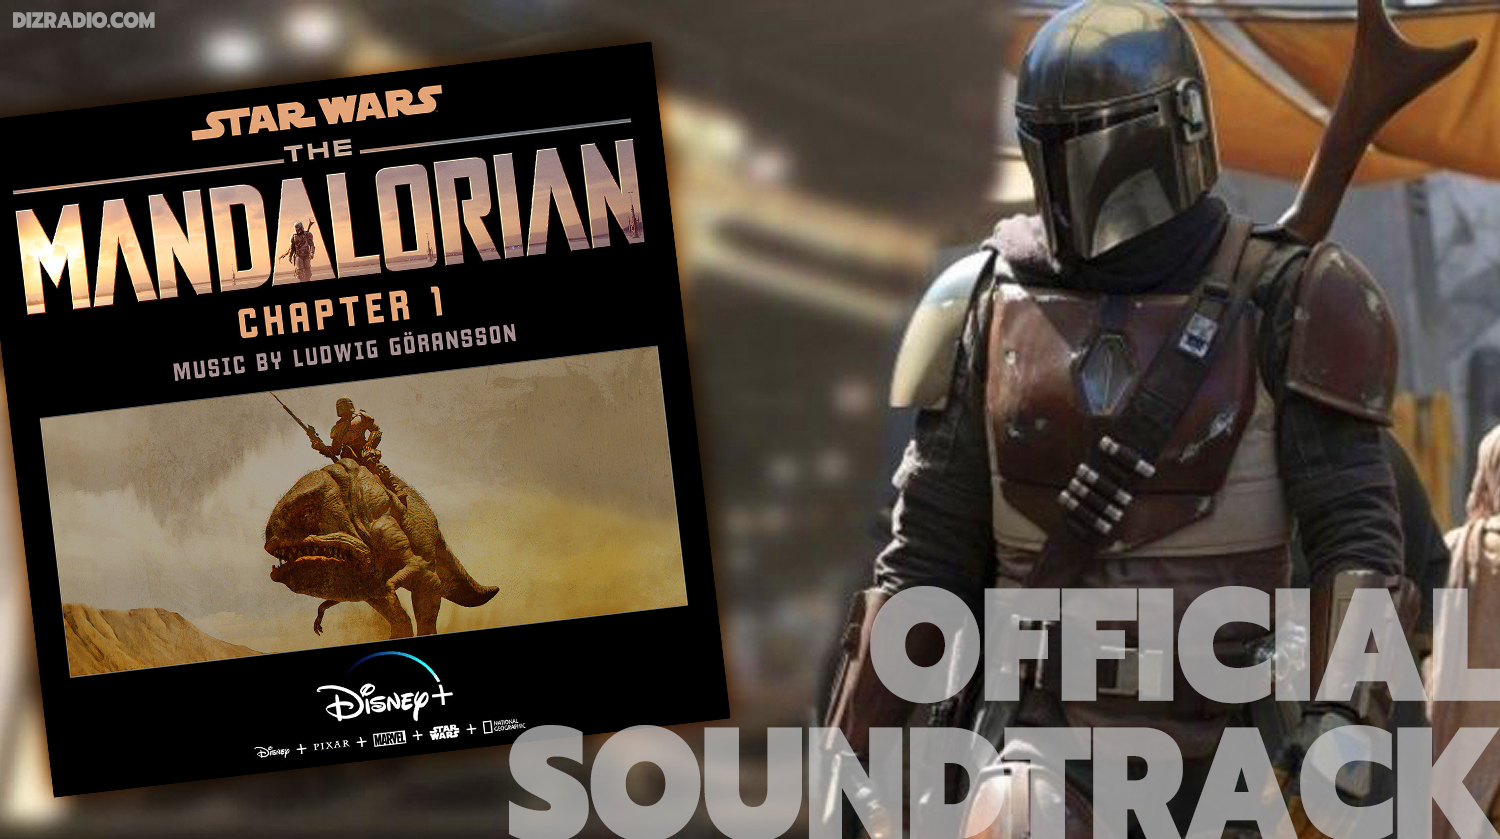 The Mandalorian: Chapter 1 Digital Soundtrack Available Today - Release Dates for Remaining Chapters too!